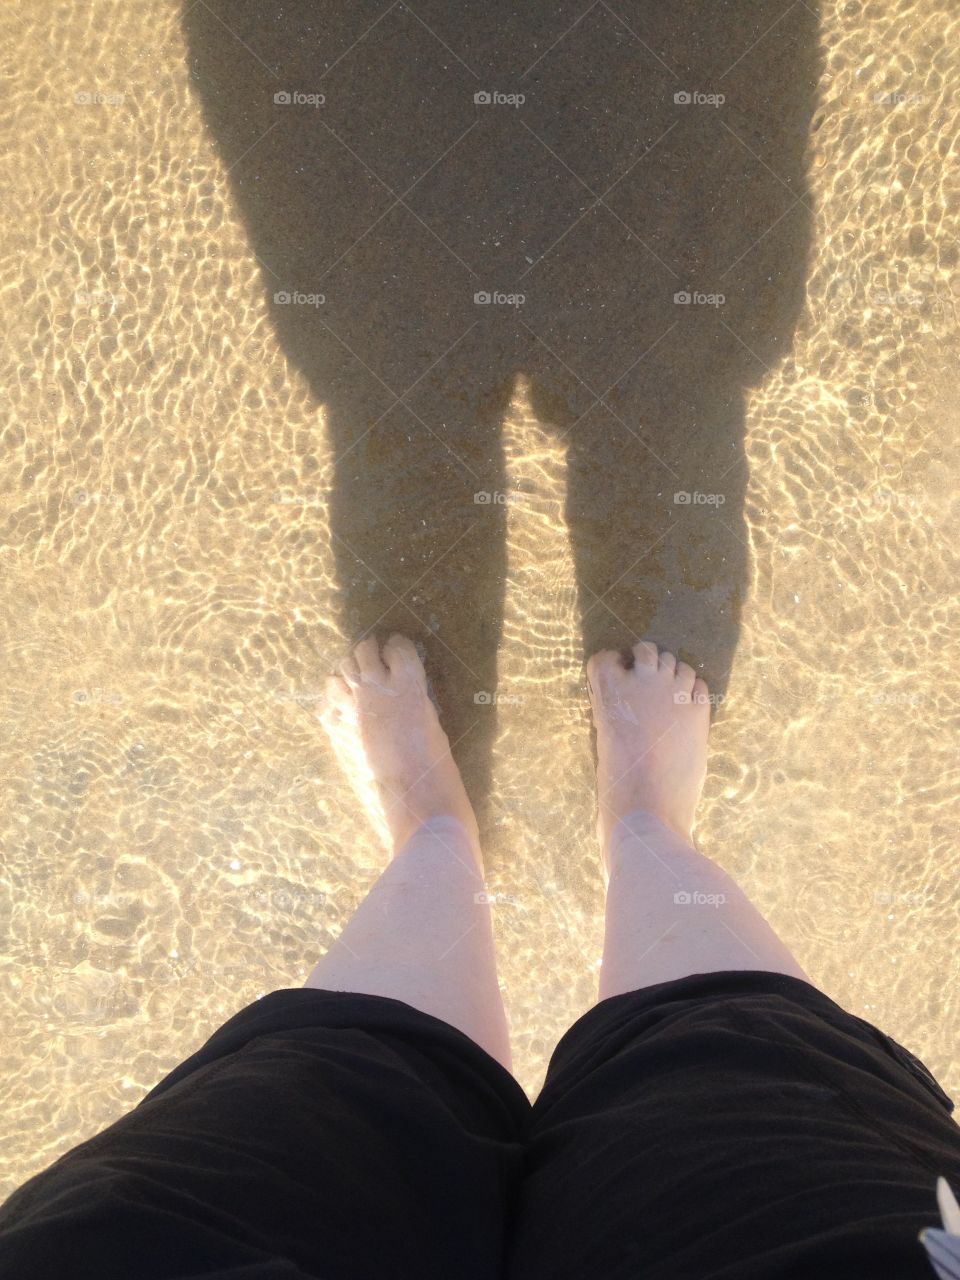 Toes in the Virginia Beach sand.